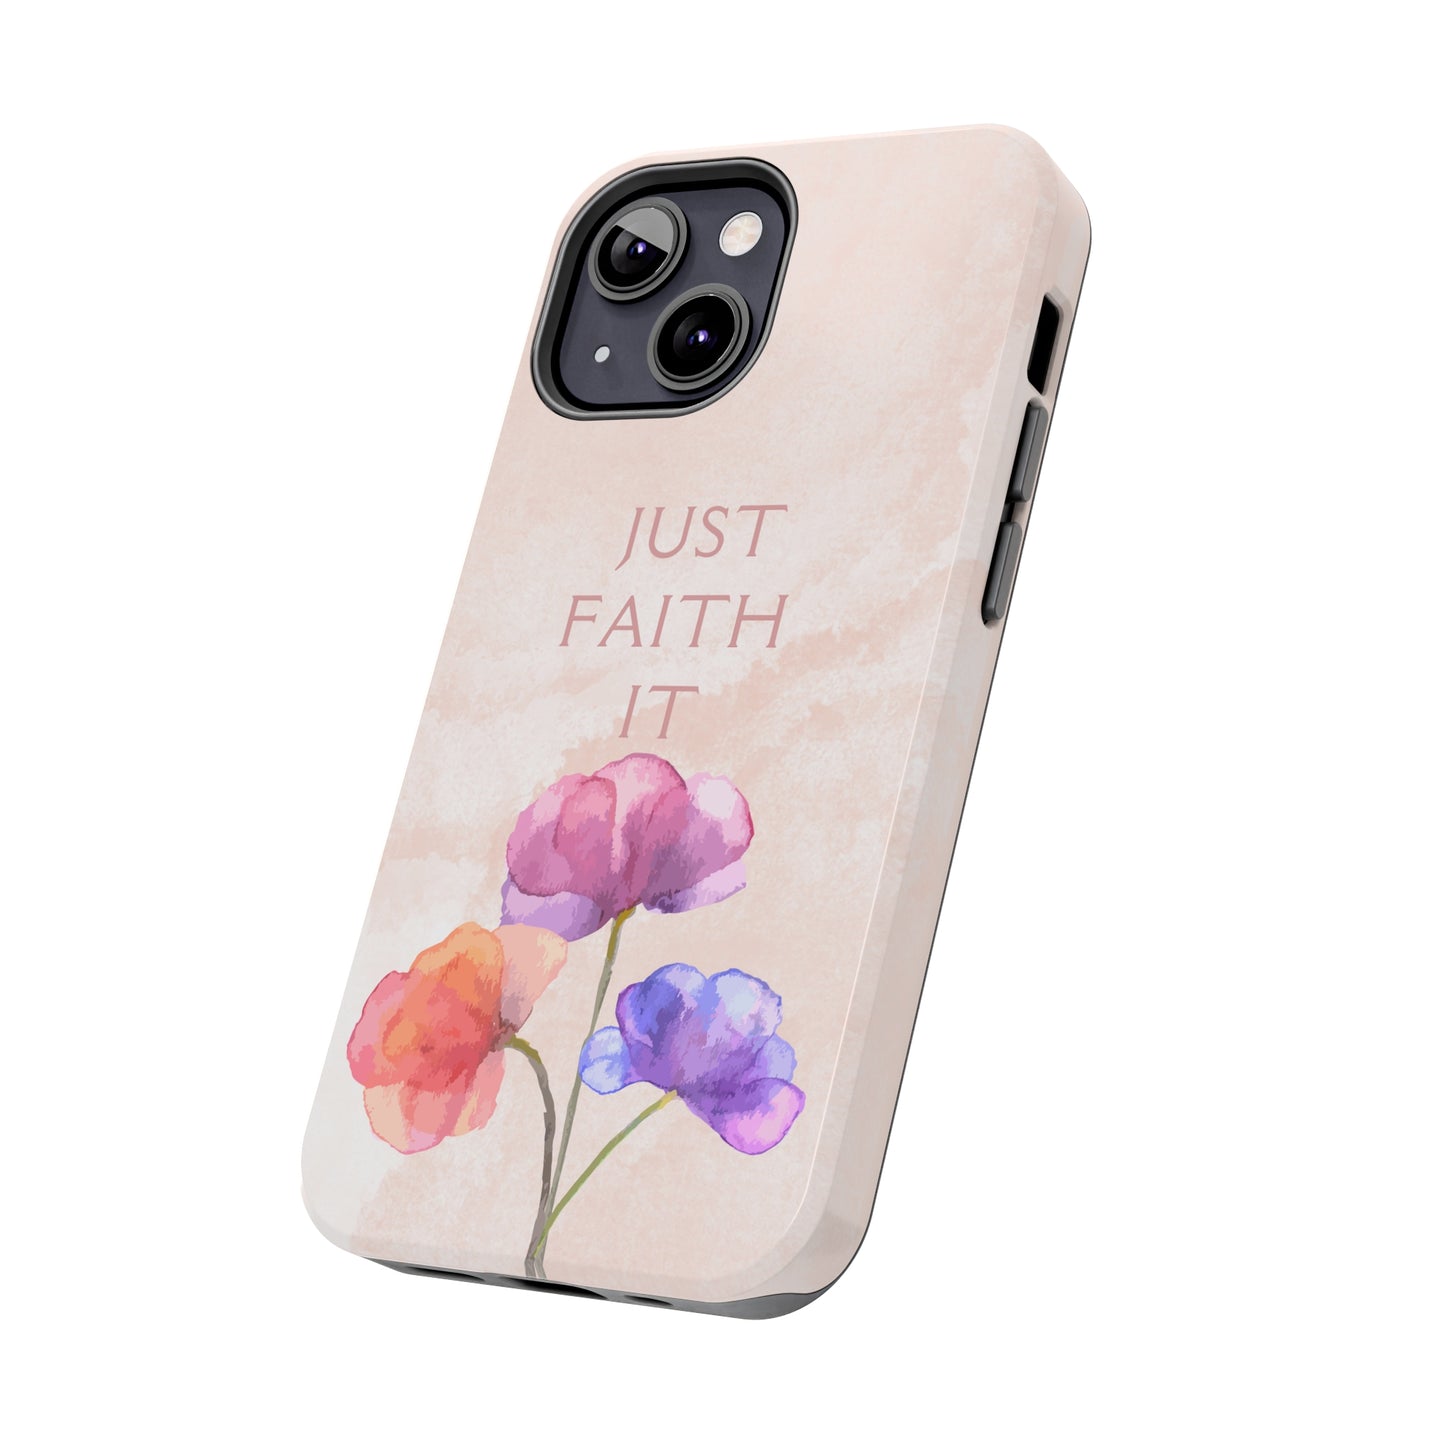 Just Faith It  - Pink - Custom Phone Case, Impact-Resistant Polycarbonate Shell, Wireless Charging, iPhone 7, 8, X, 11, 12, 13, 14 & more. Printify